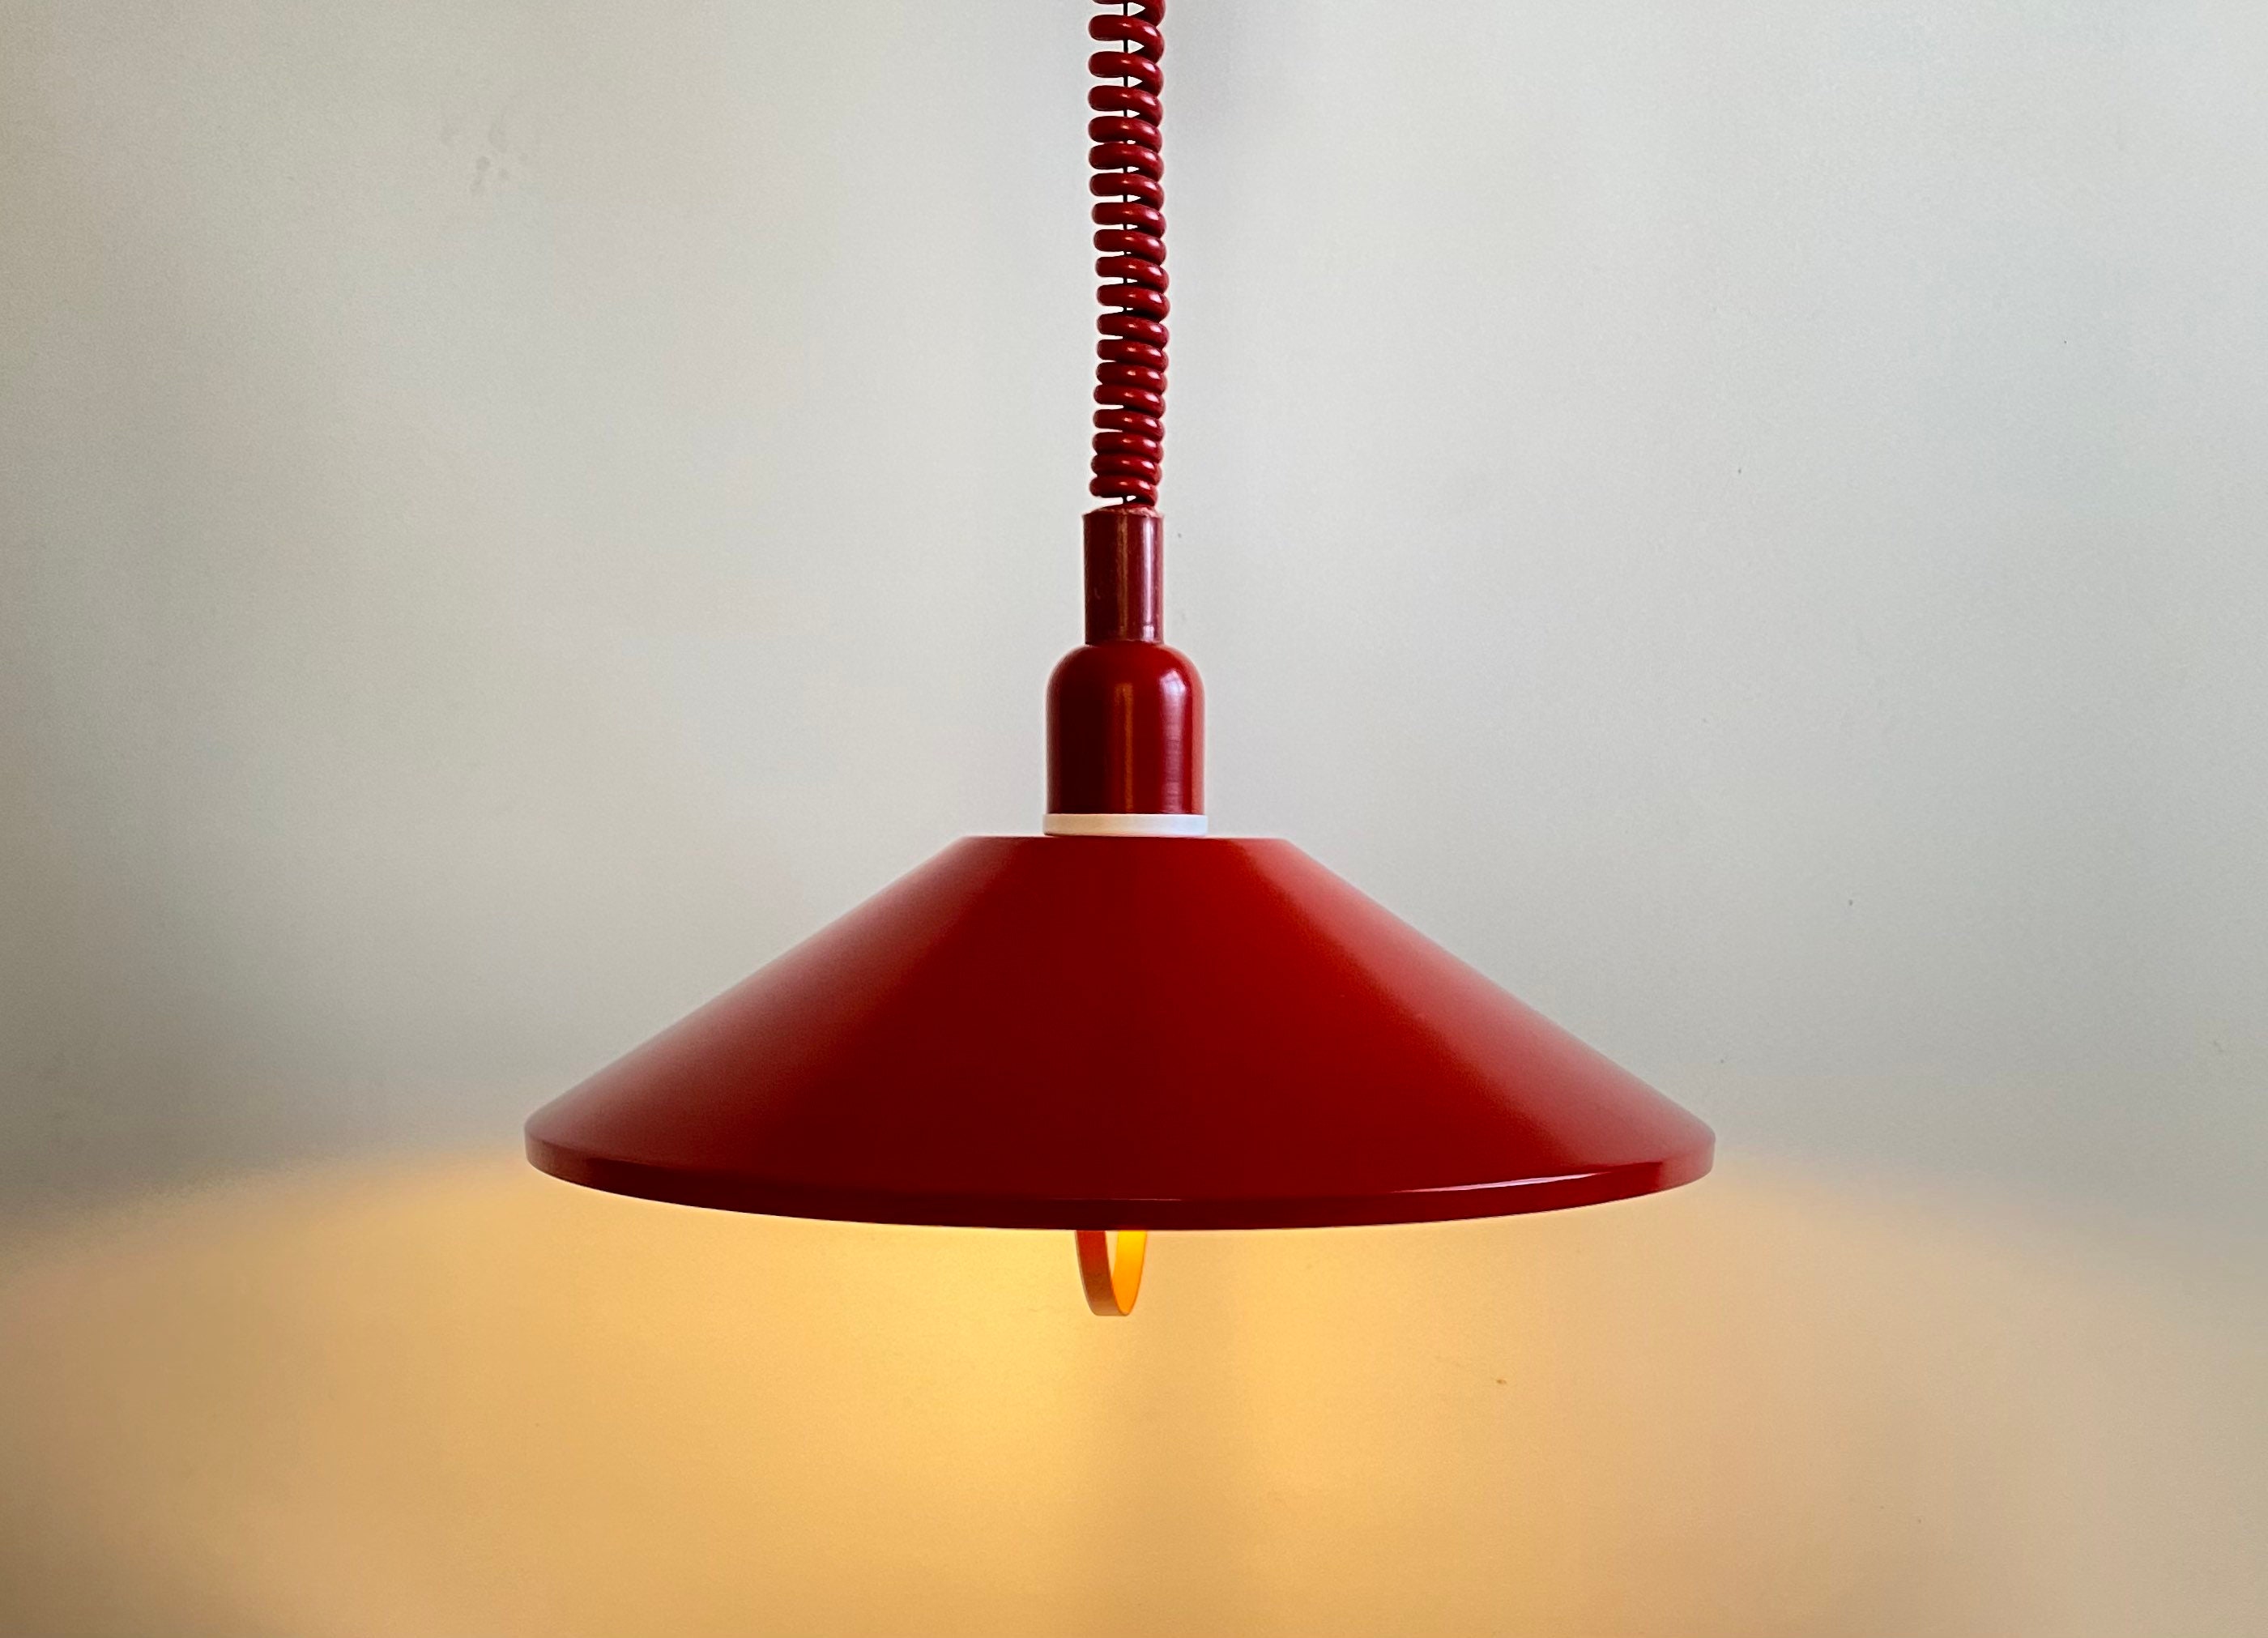 Metal Ceiling Lamp by Rex Lennart for IKEA, 1970s for sale at Pamono